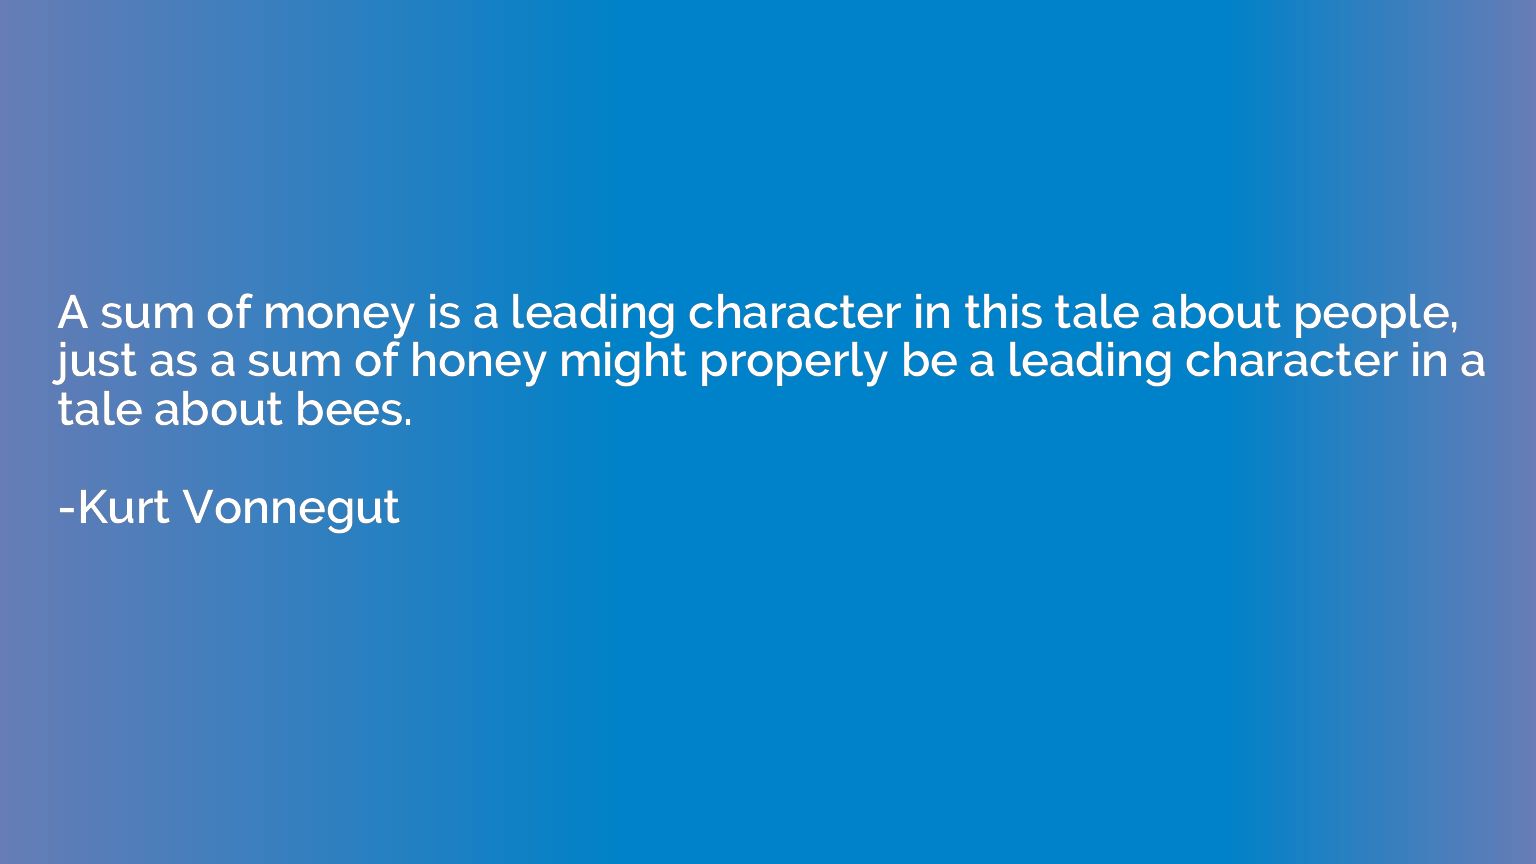 A sum of money is a leading character in this tale about peo